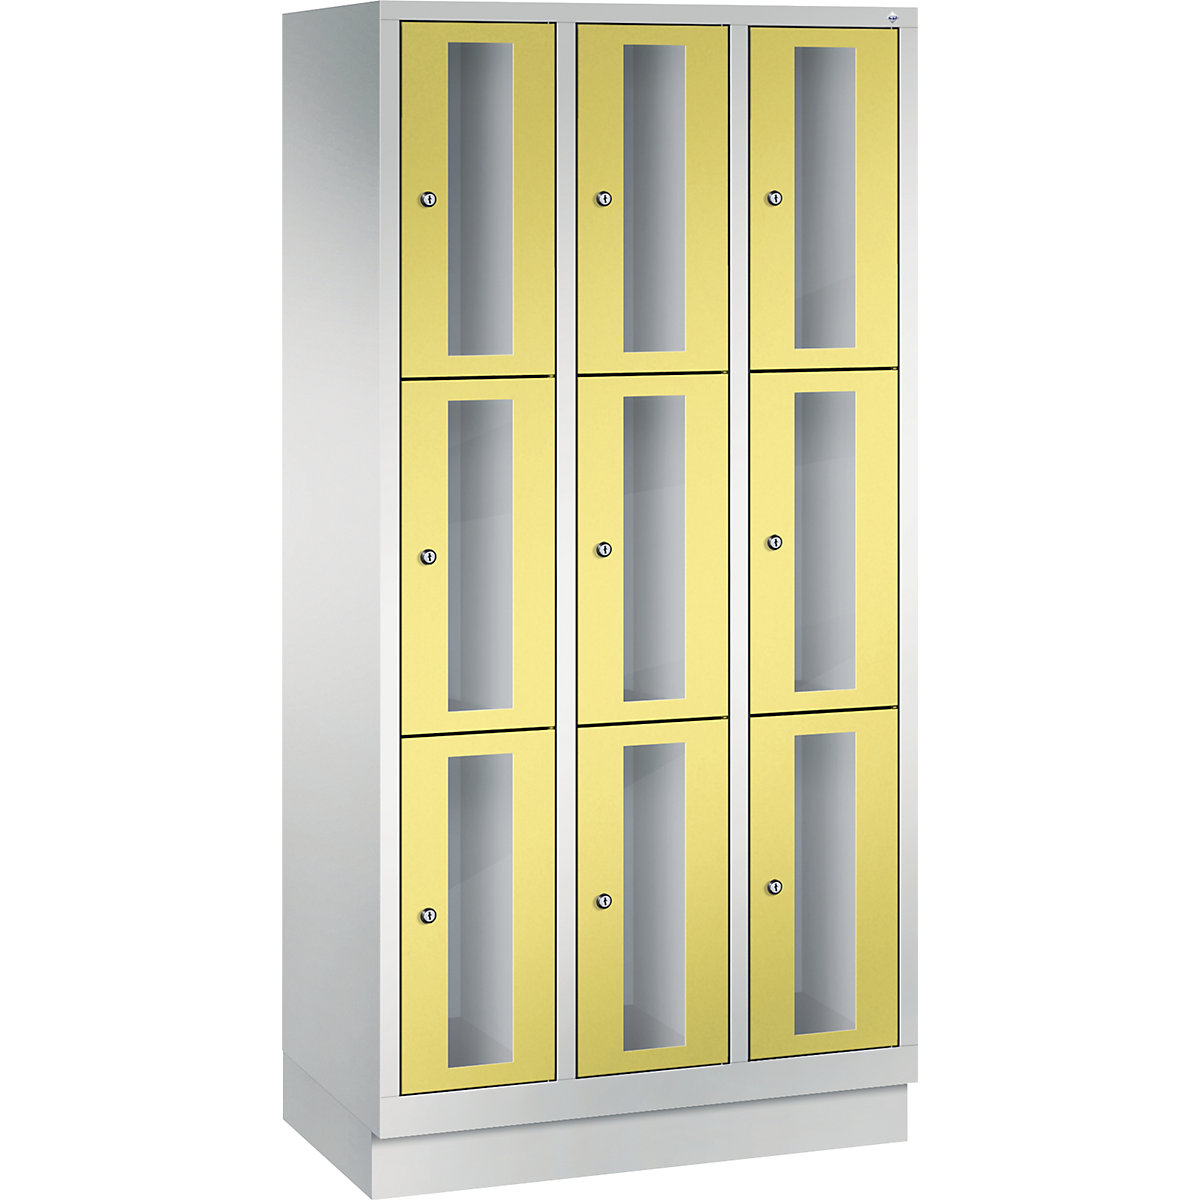 C+P – CLASSIC locker unit, compartment height 510 mm, with plinth, 9 compartments, width 900 mm, sulphur yellow door